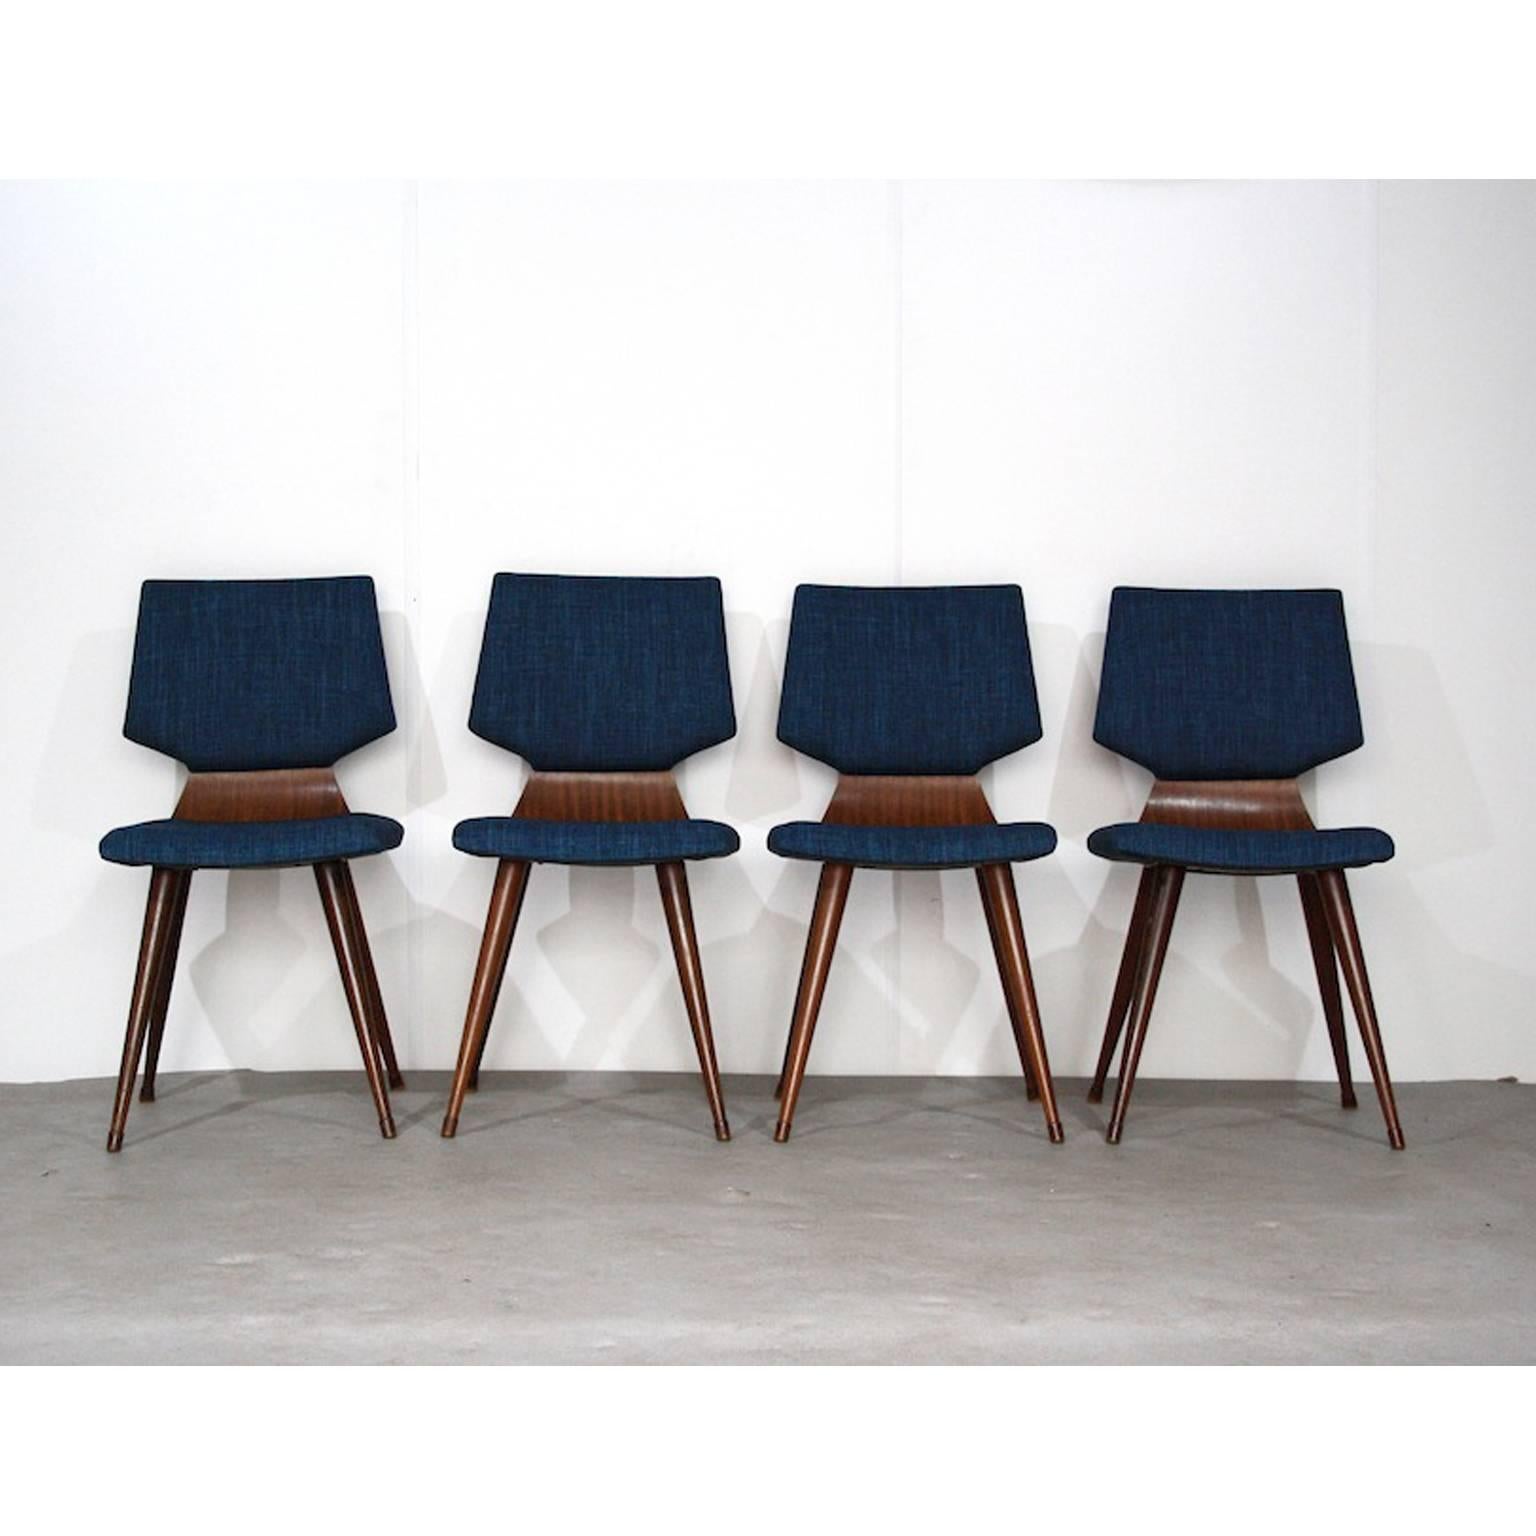 Beautiful dining chairs with a plywood back. New blue upholstery. By Cor Alons for Gouda Den Boer.

Width: 40- 46 cm
Depth: 45 cm: seating 38 cm
Height: 83 cm; seating 45 cm.